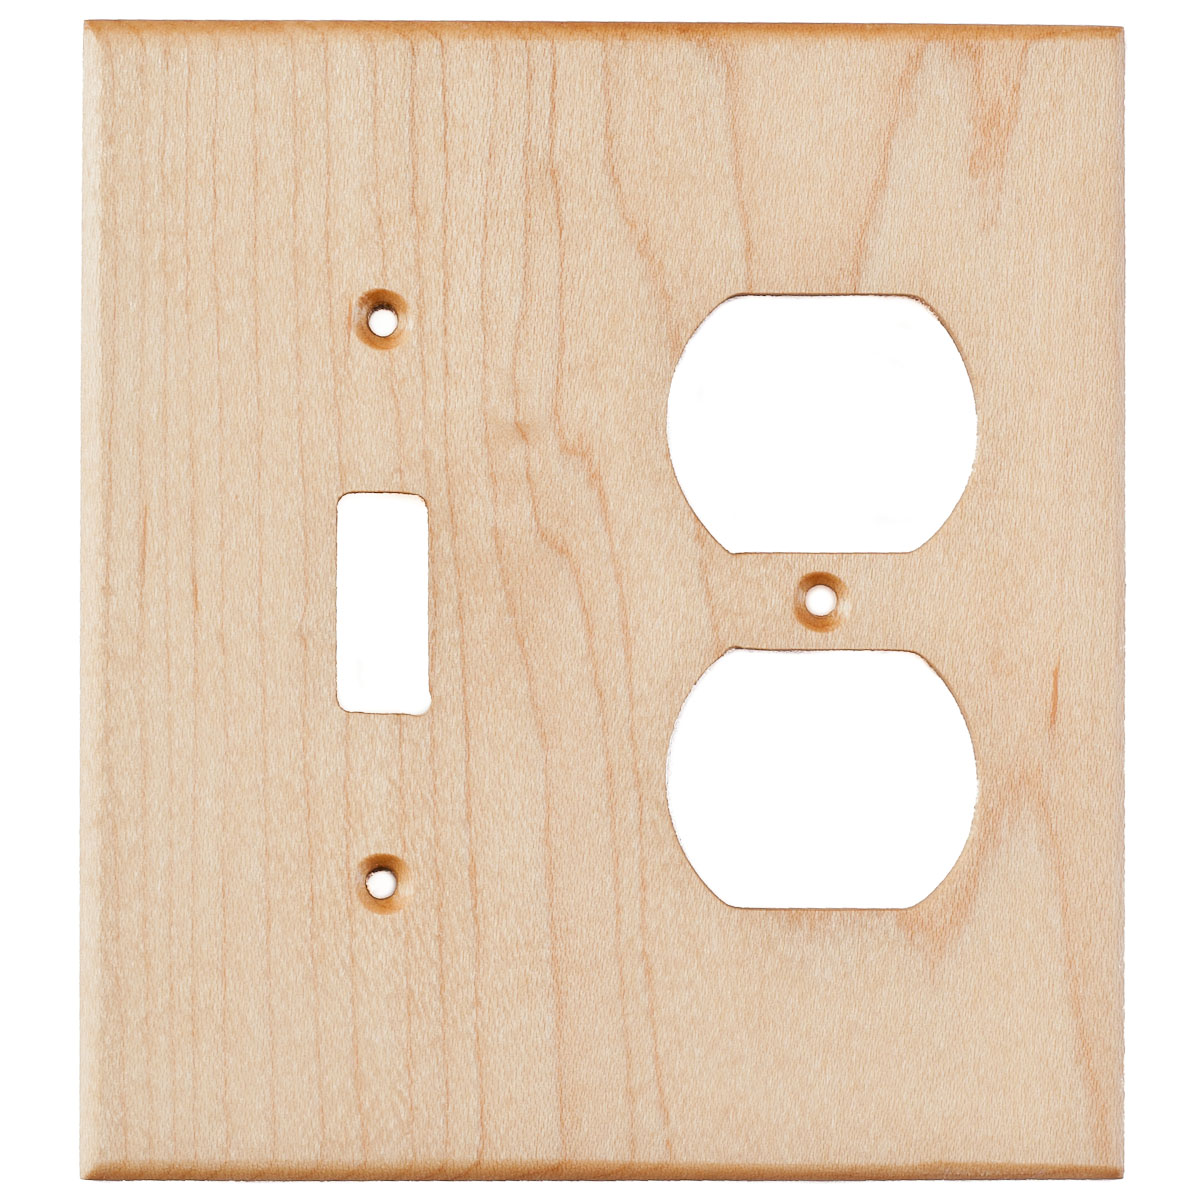 Maple Wood Wall Plate - 2 Gang Combo - Light Switch, Duplex Outlet Cover